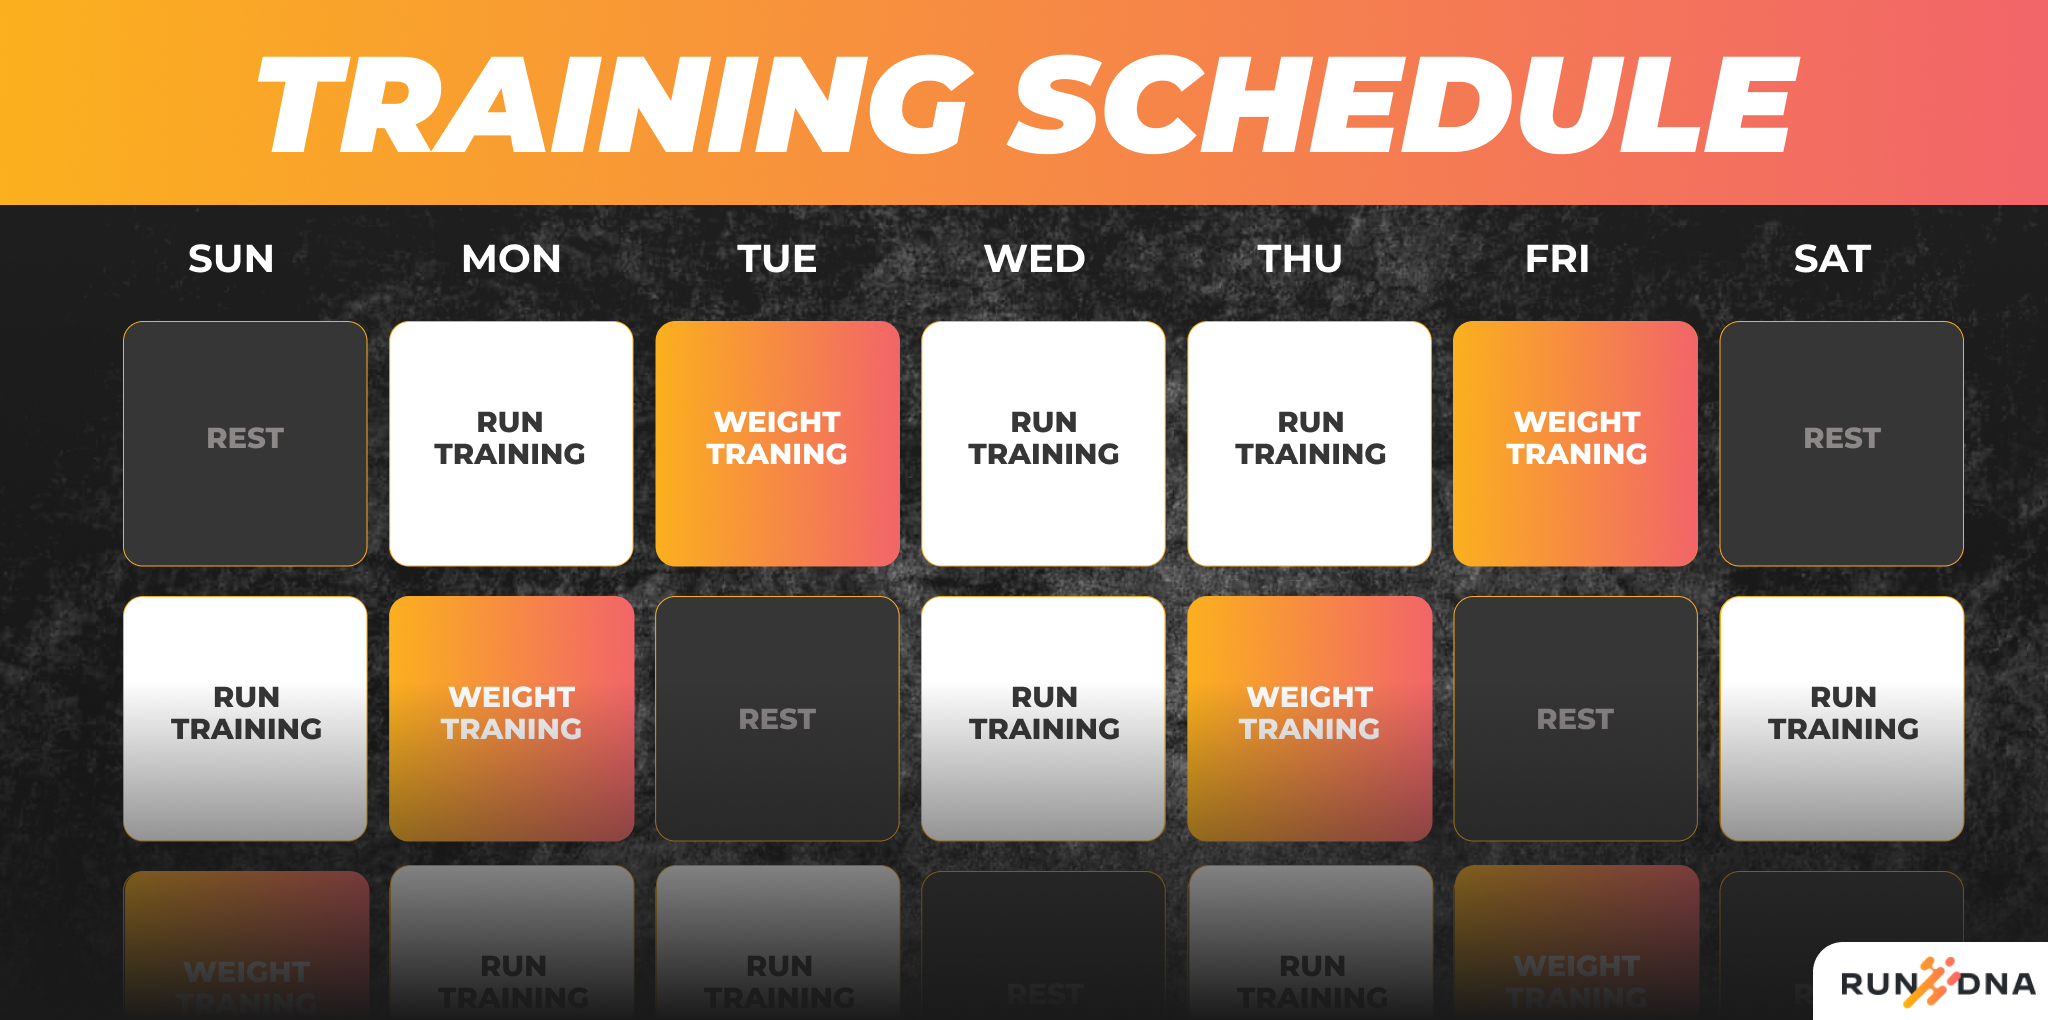 Scheduled planner showing a balanced weekly strength and running training program for runners.